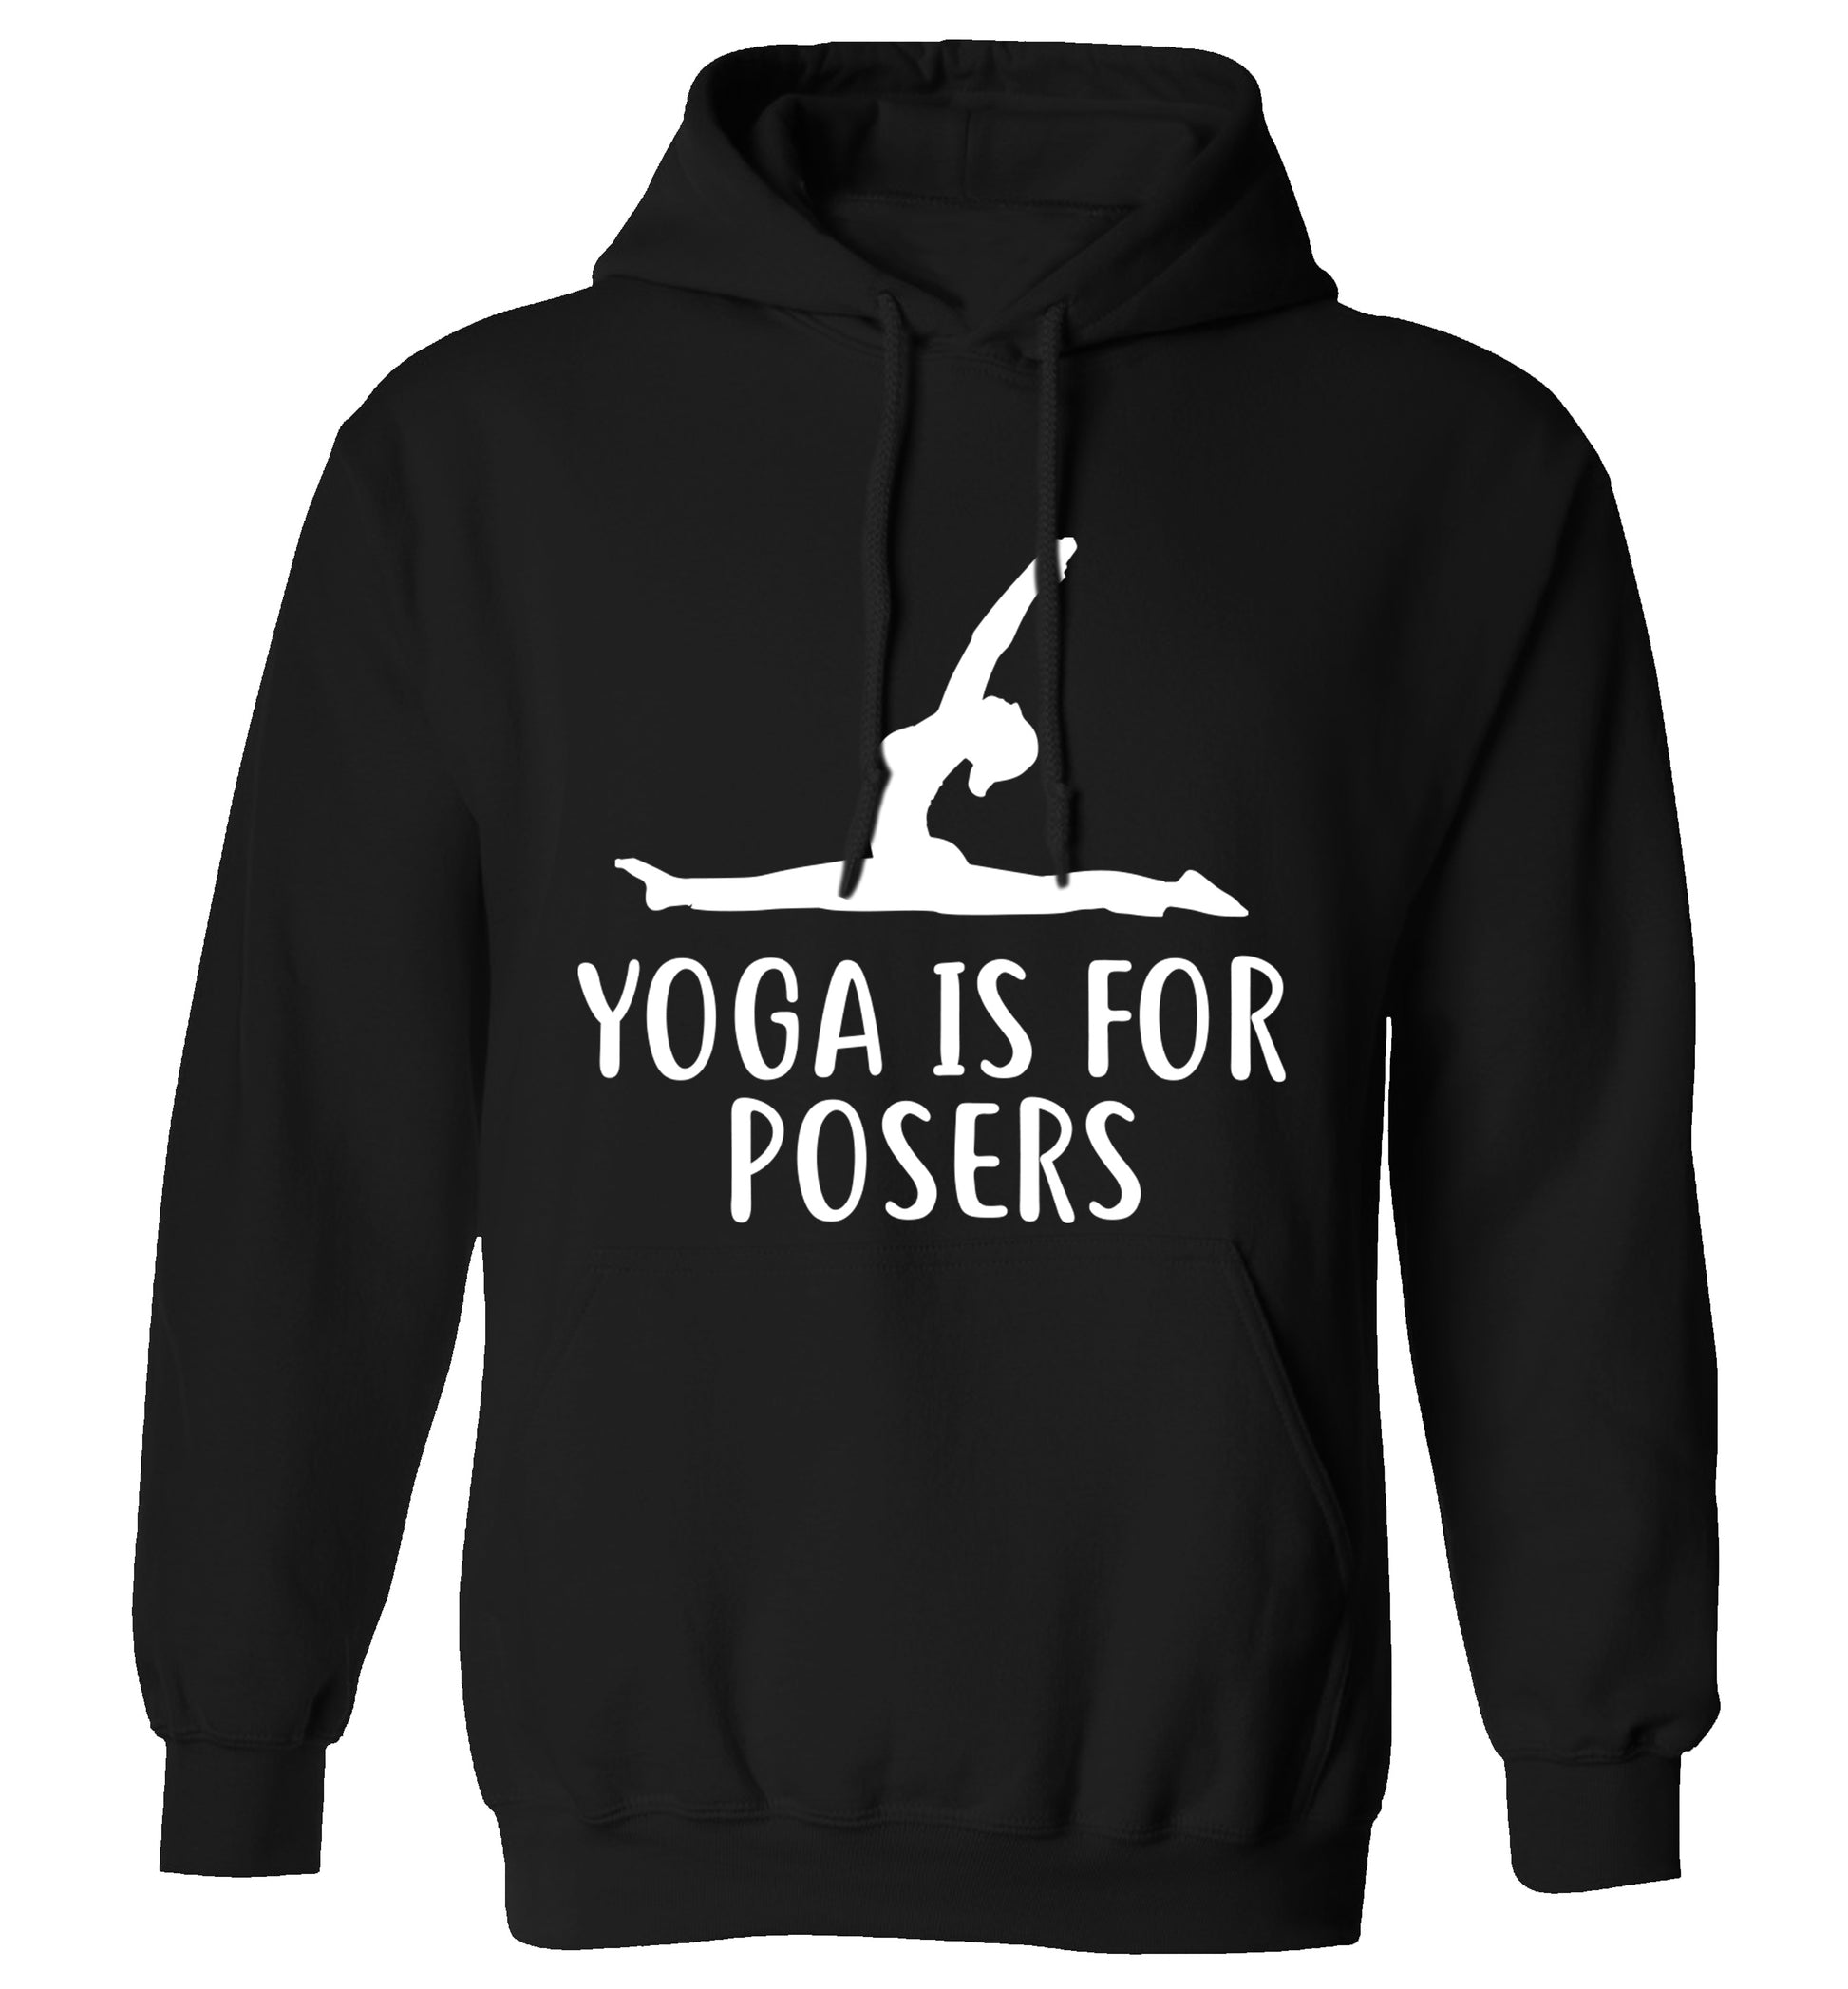 Yoga is for posers adults unisex black hoodie 2XL